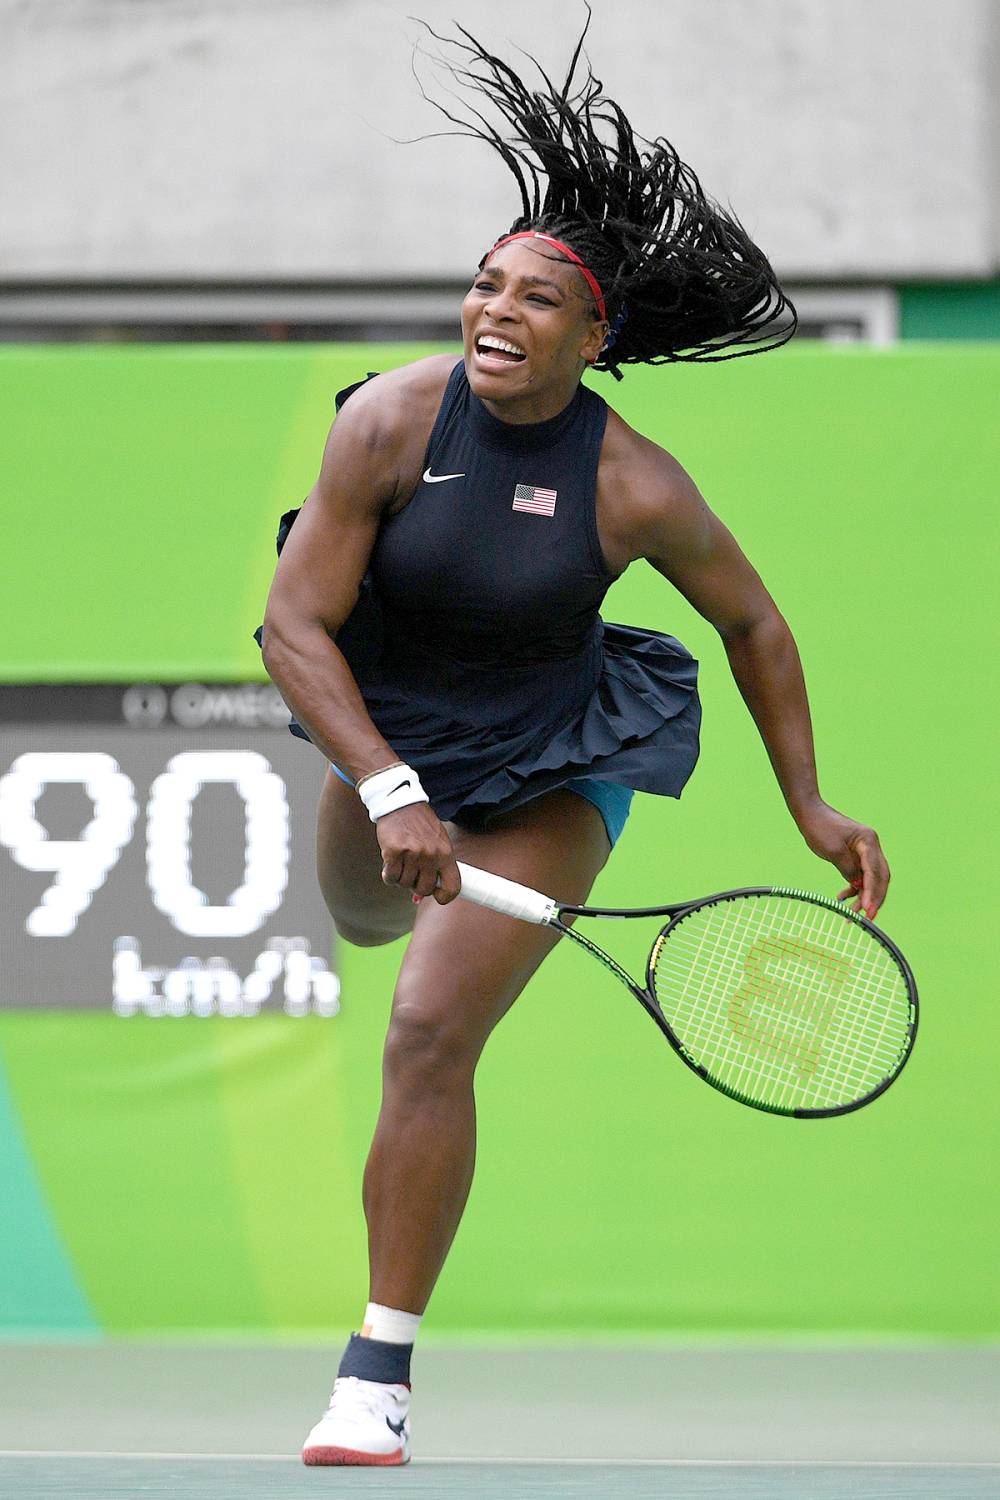 USA's Serena Williams returns the ball to Australia's Daria Gavrilova during their women's first round singles tennis match at the Olympic Tennis Centre of the Rio 2016 Olympic Games in Rio de Janeiro on August 7, 2016.